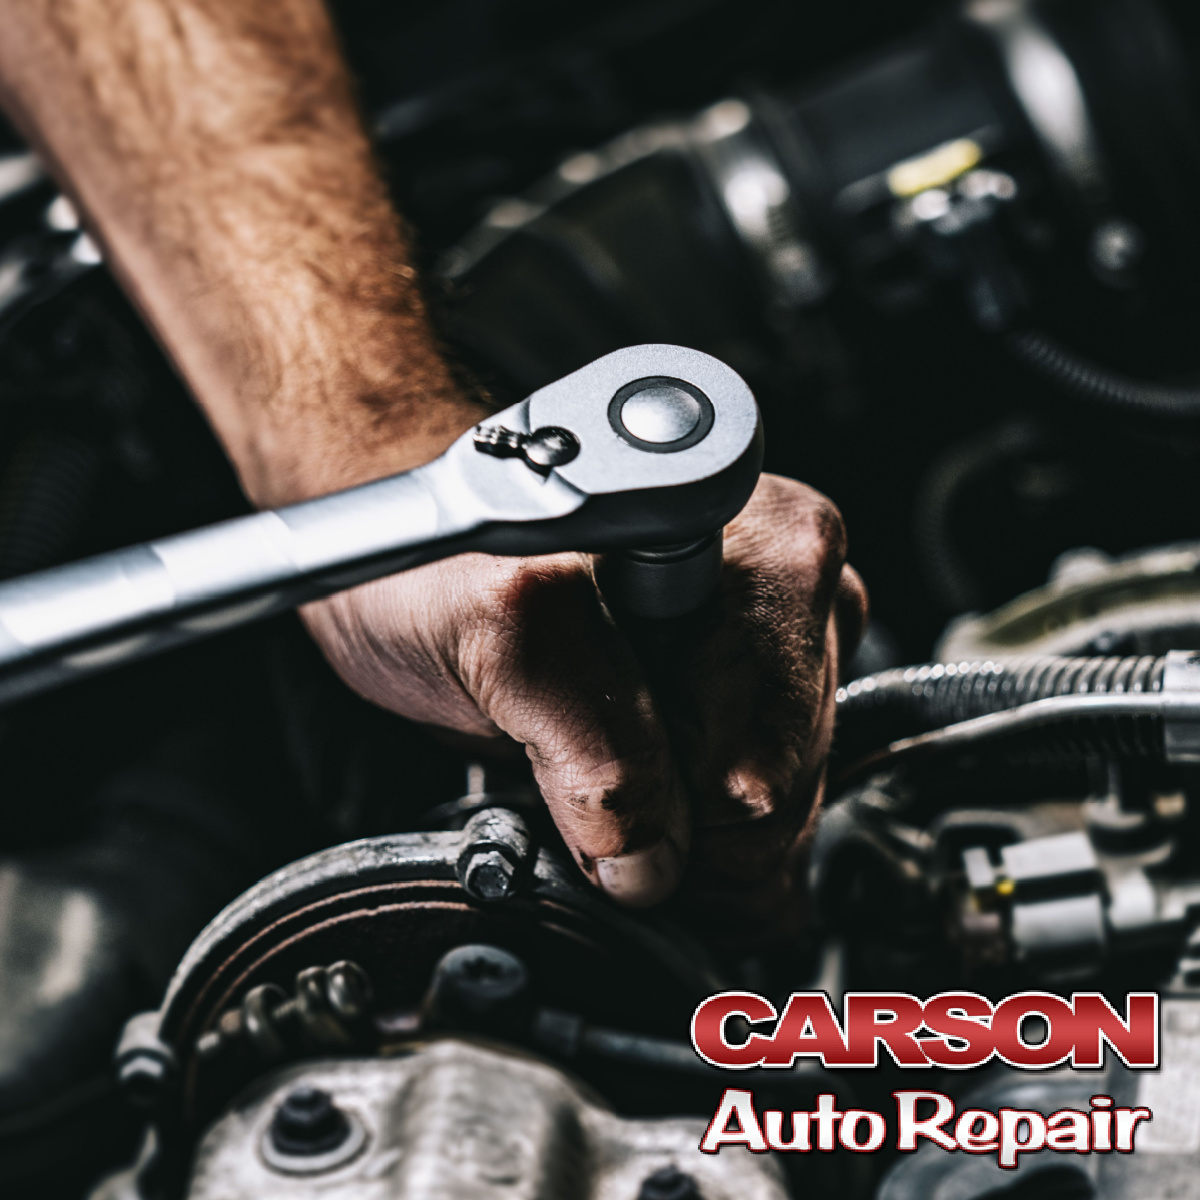 Coast Down to Carson Auto Repair for General Car Repair Services Today